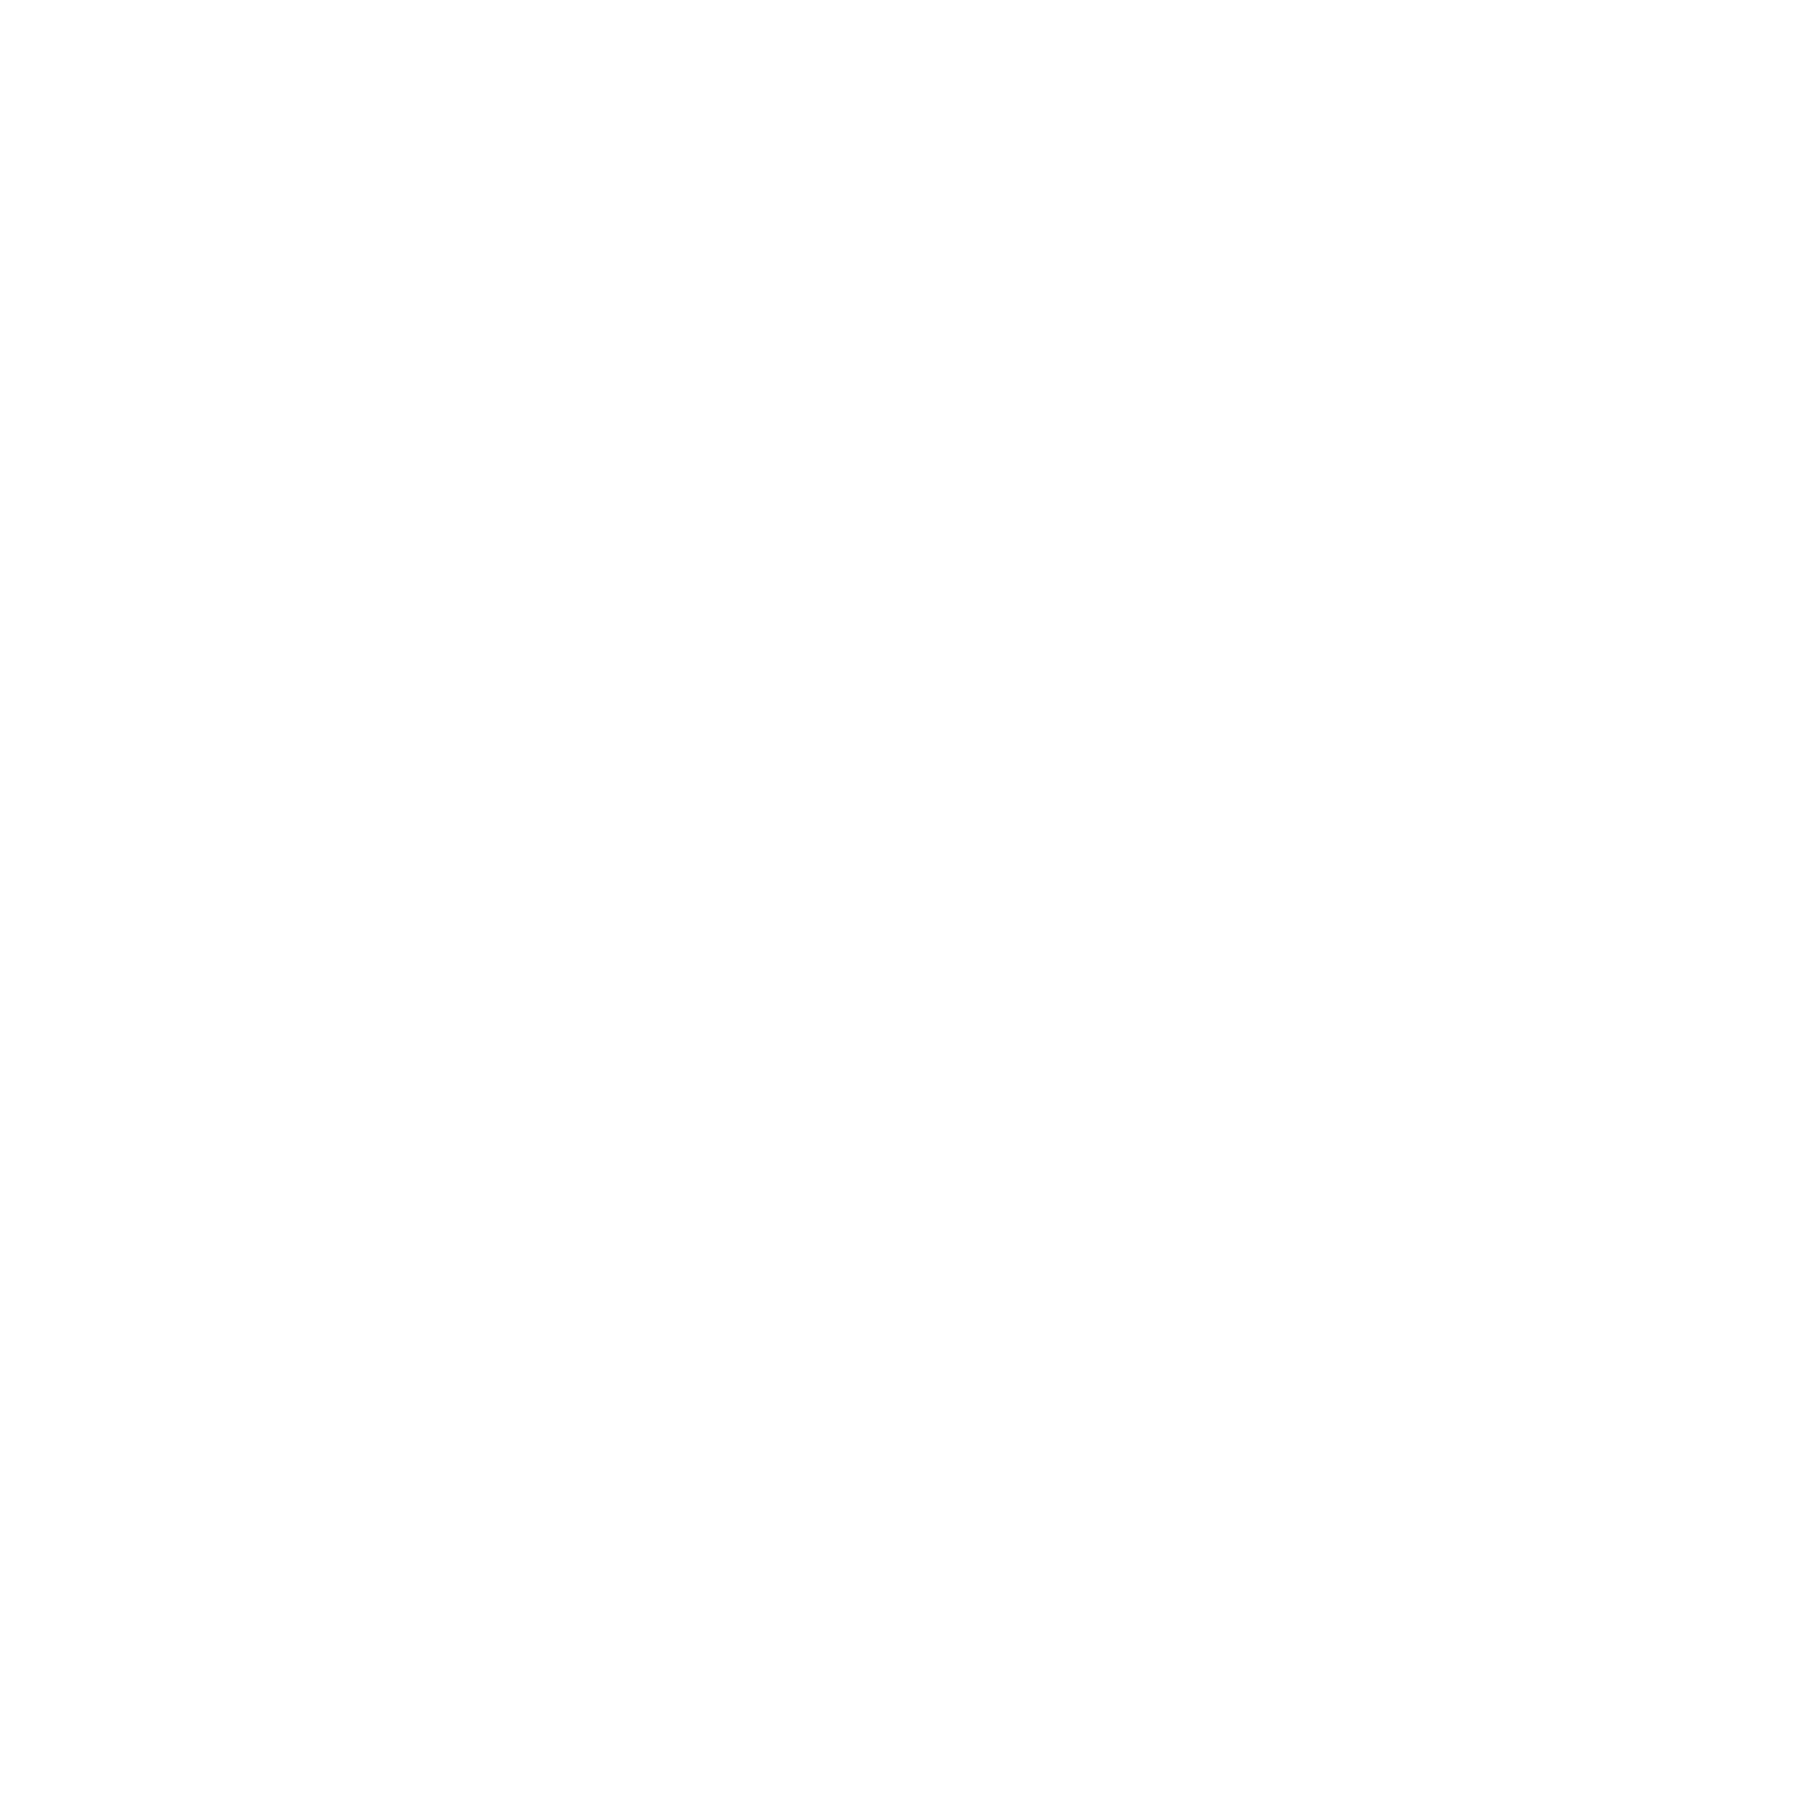 Make Your Move in Flint and Genesee light logo